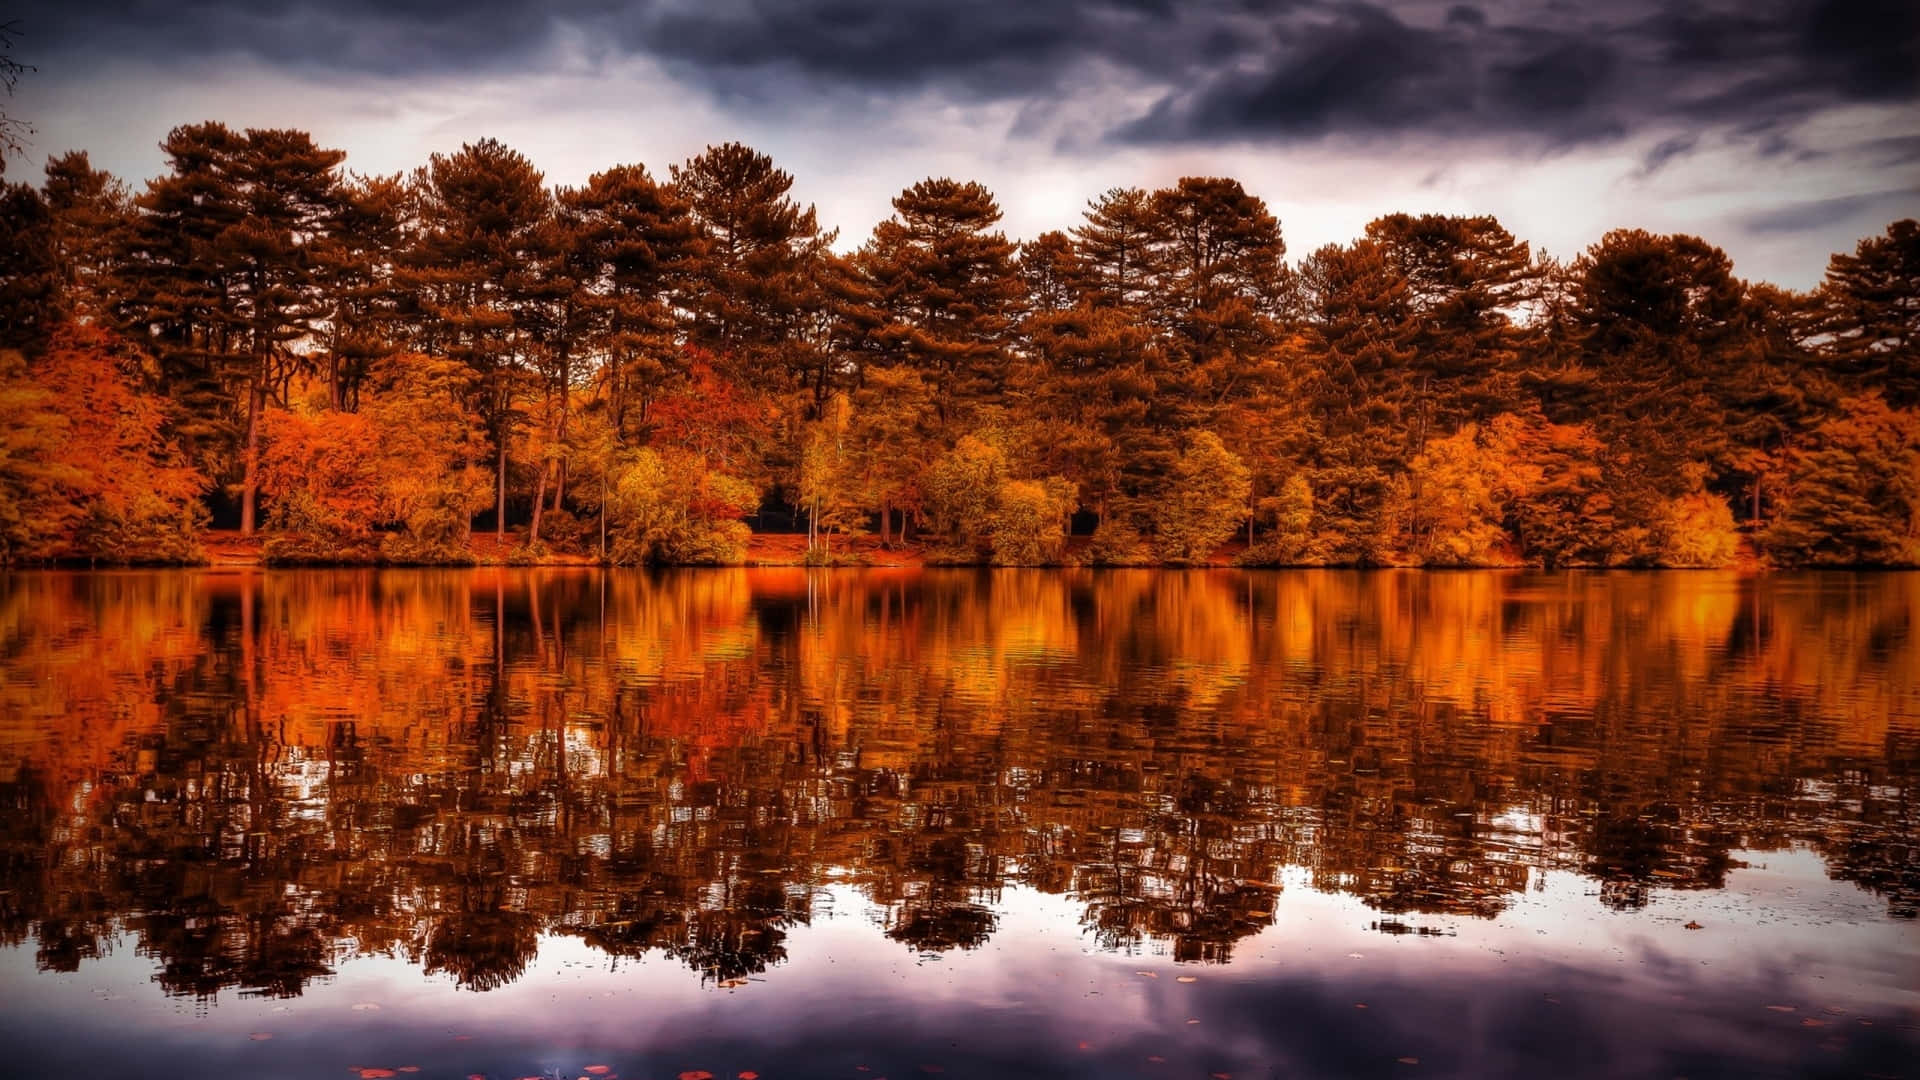 A mesmerizing autumn evening by the lake Wallpaper